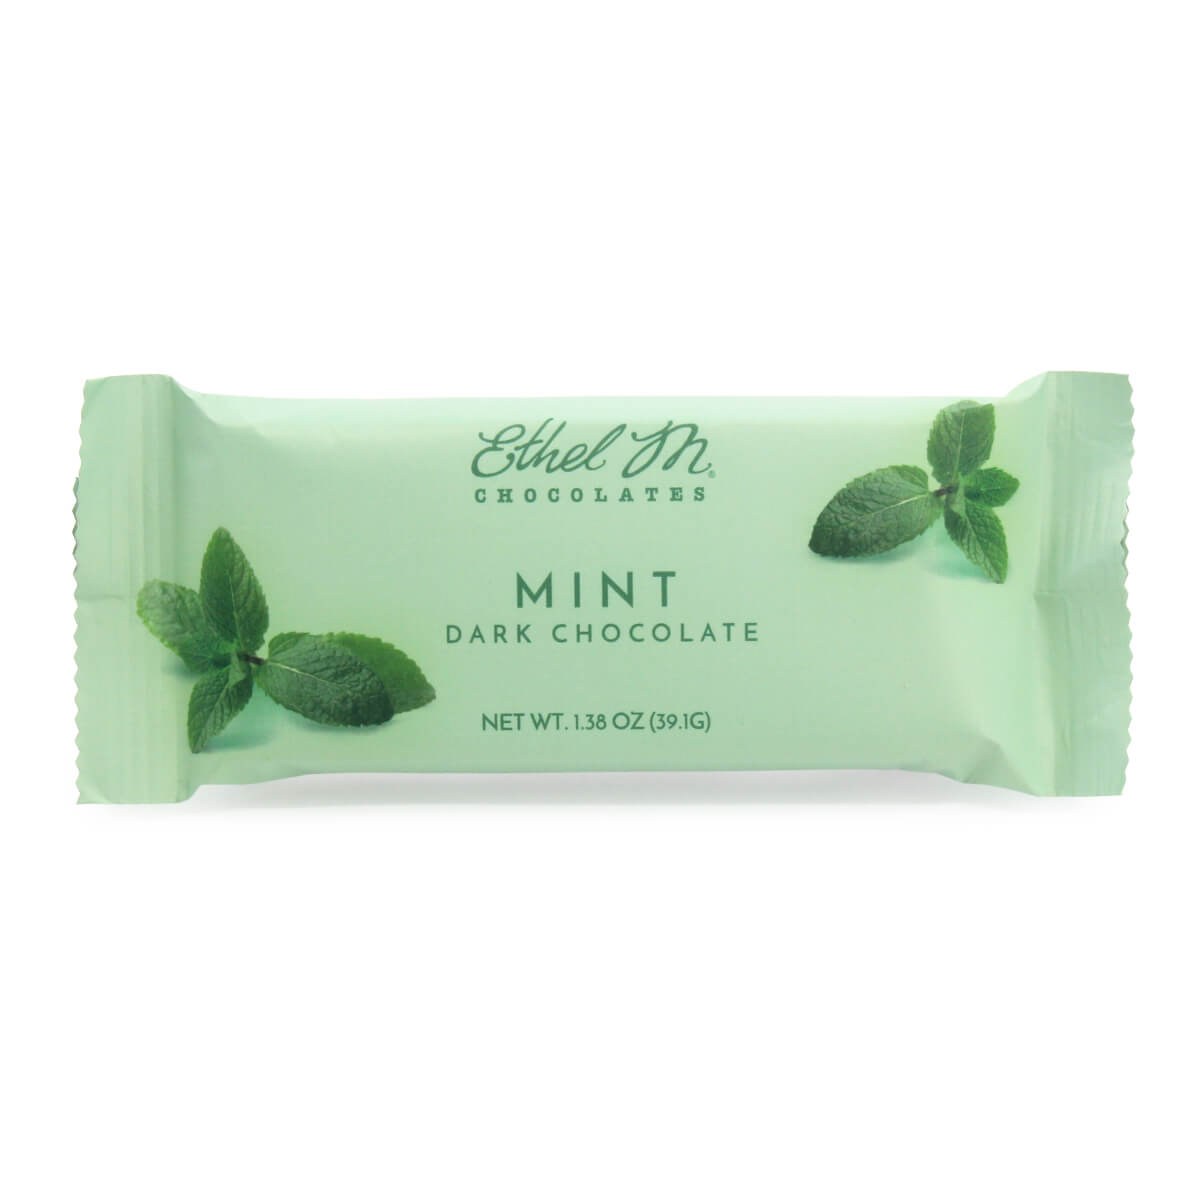 Our Premium Dark Chocolate Mint Bar is perfect to slip into lunches, take on a road trip, or share with a friend.